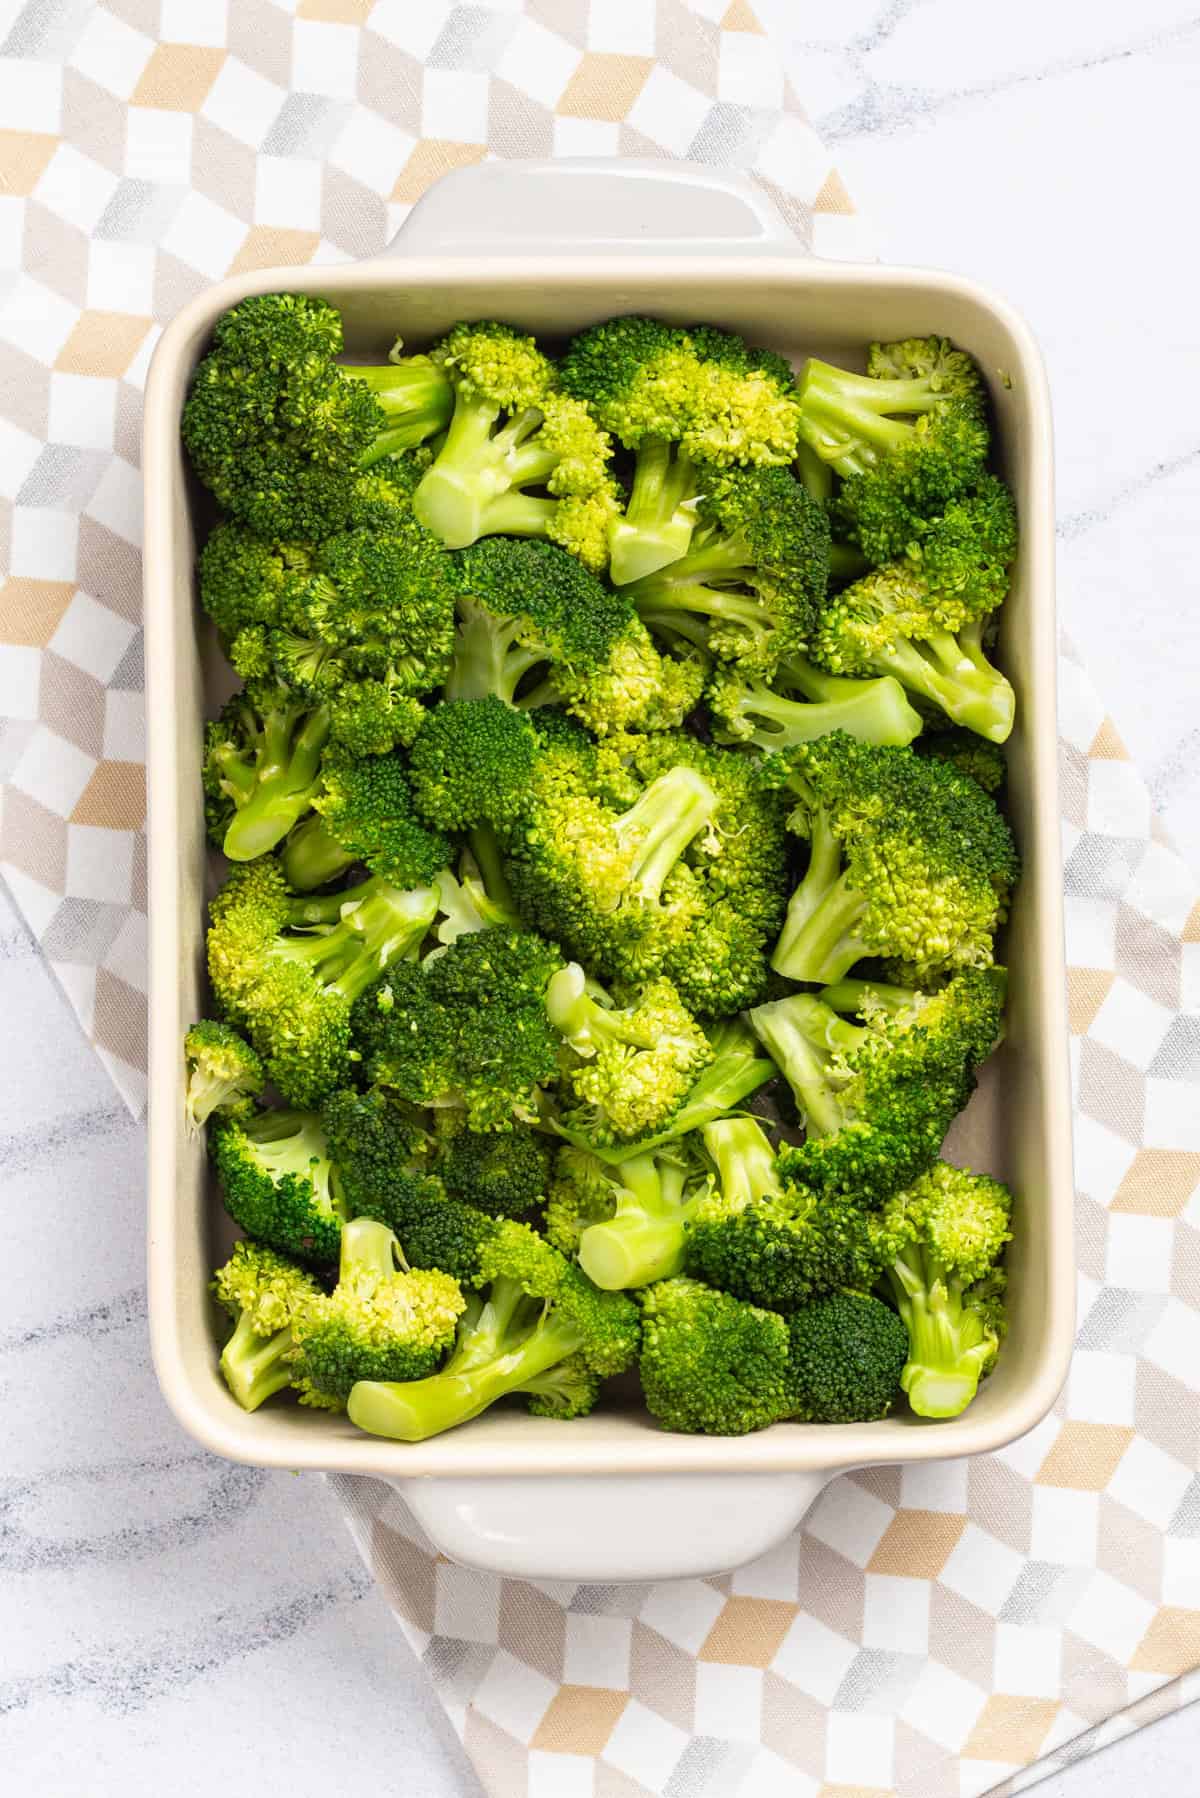 An overhead image of a white casserole dish filled with broccoli florets.